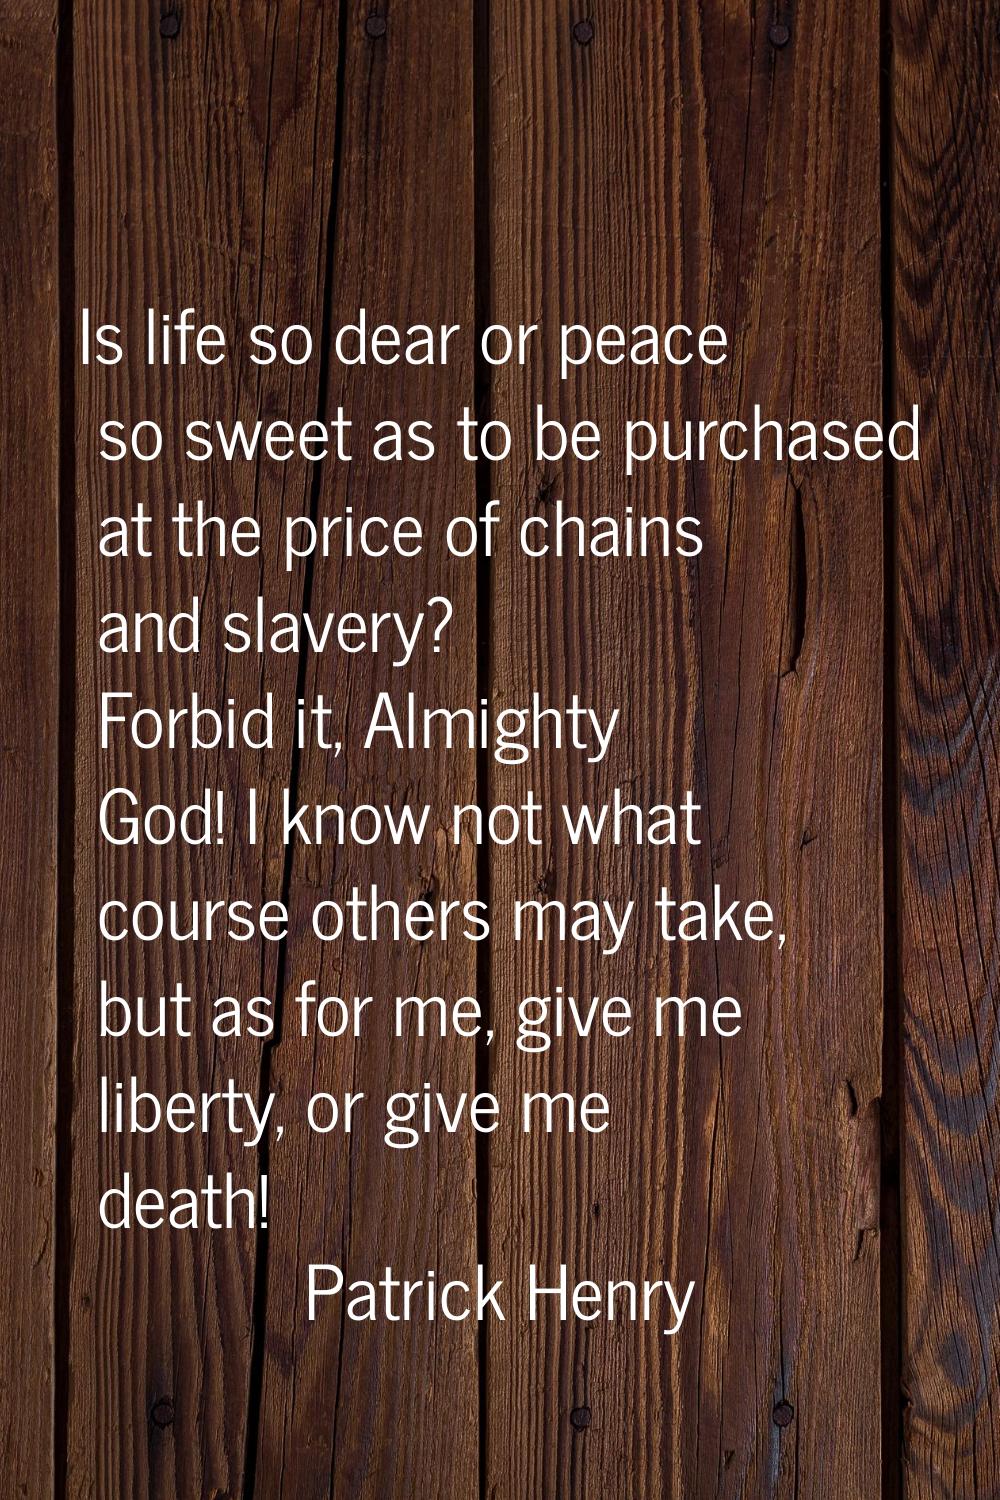 Is life so dear or peace so sweet as to be purchased at the price of chains and slavery? Forbid it,